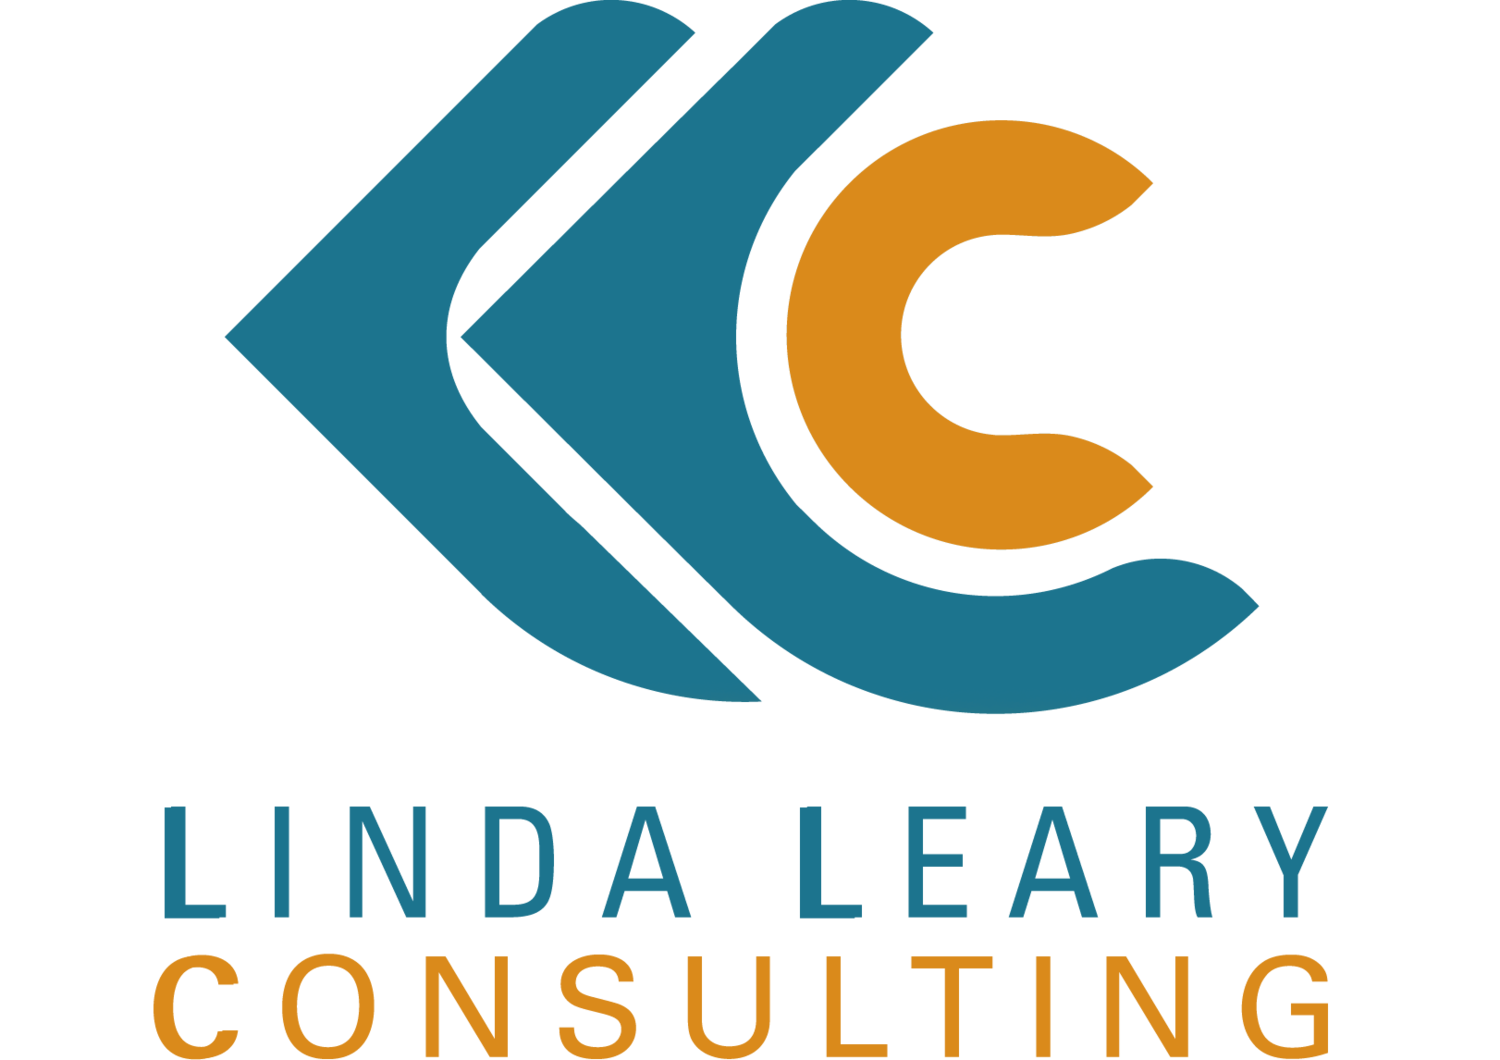 Linda Leary Consulting